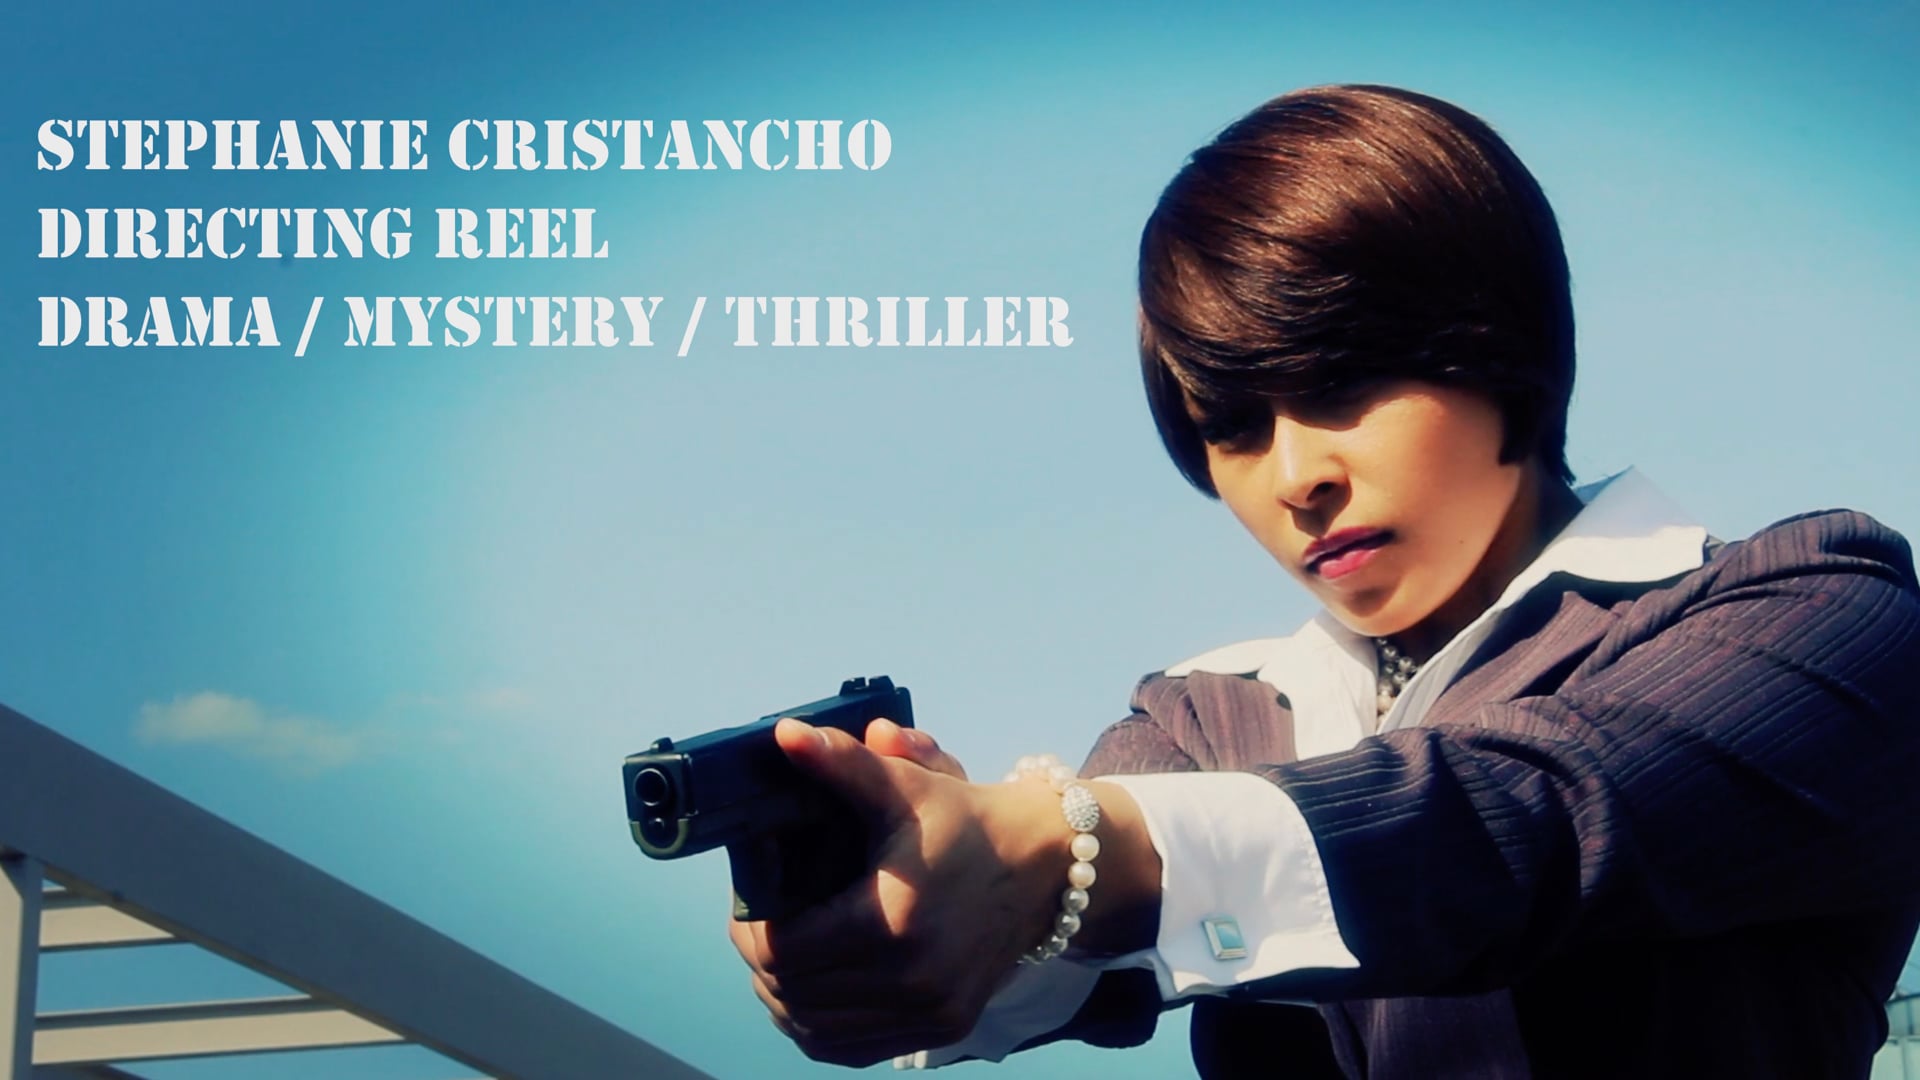 Stephanie Cristancho Directing Reel Drama / Mystery / Thriller